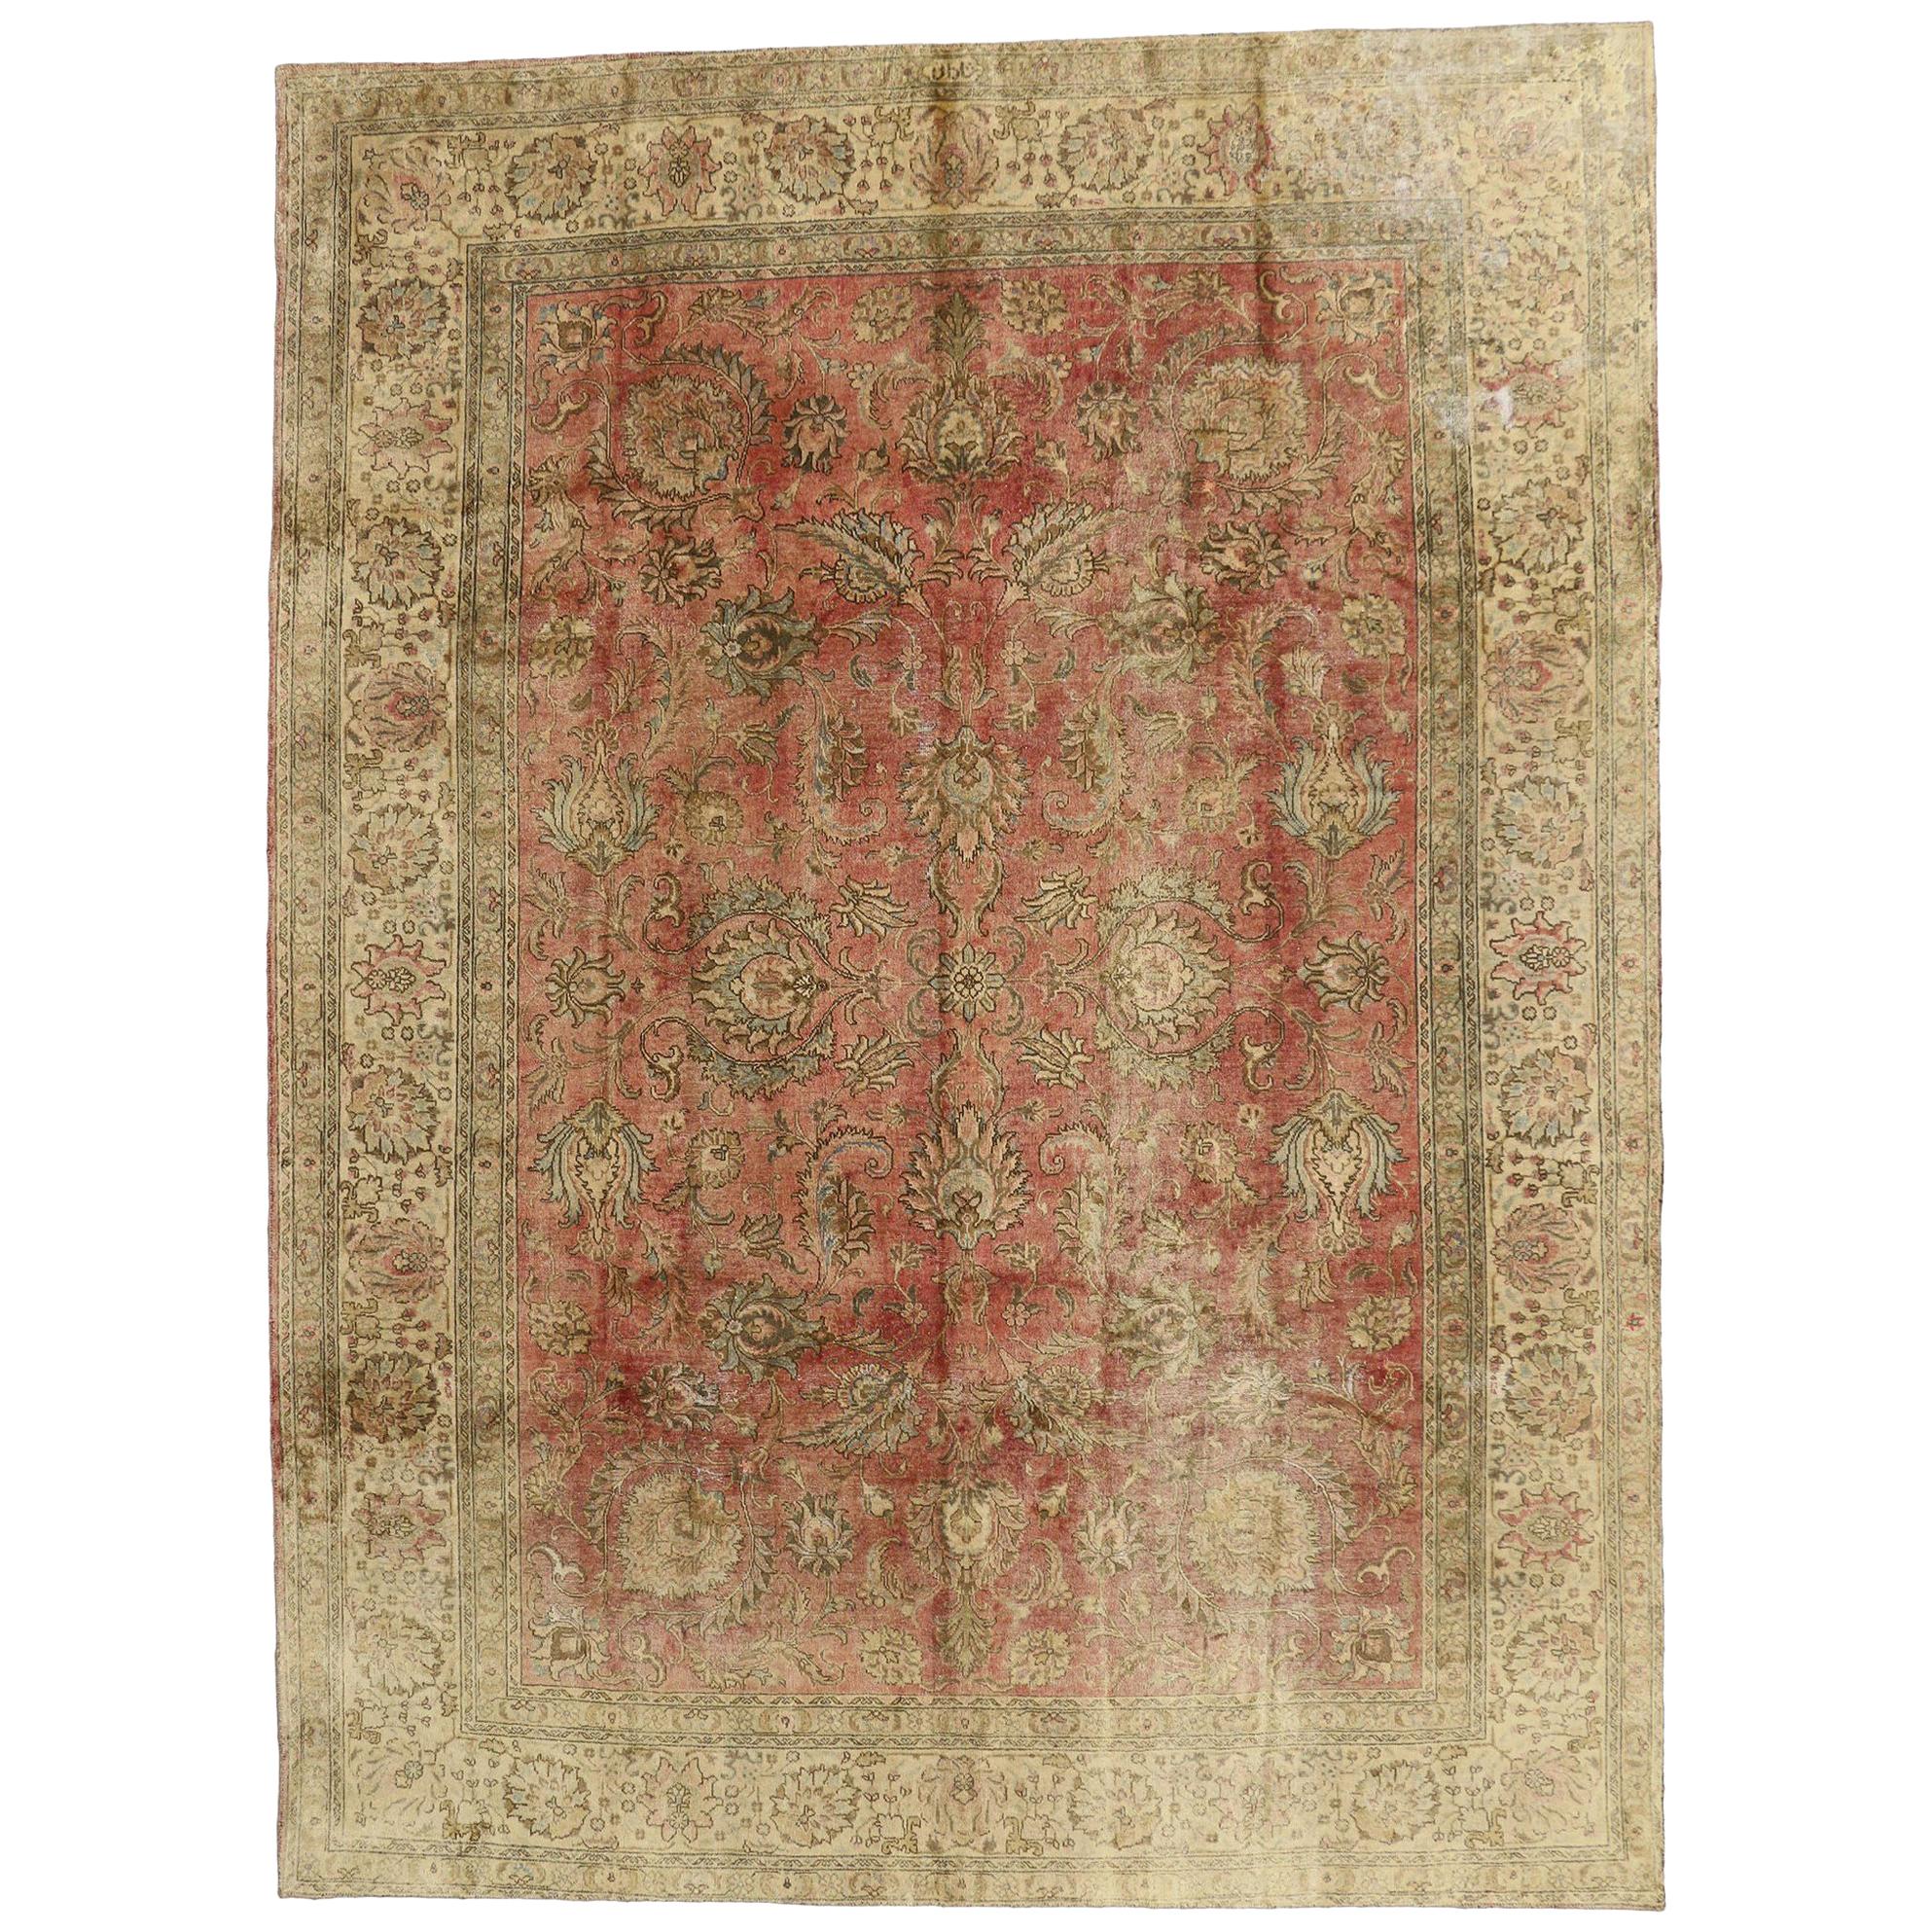 Distressed Antique Persian Tabriz Rug Industrial Rustic Style